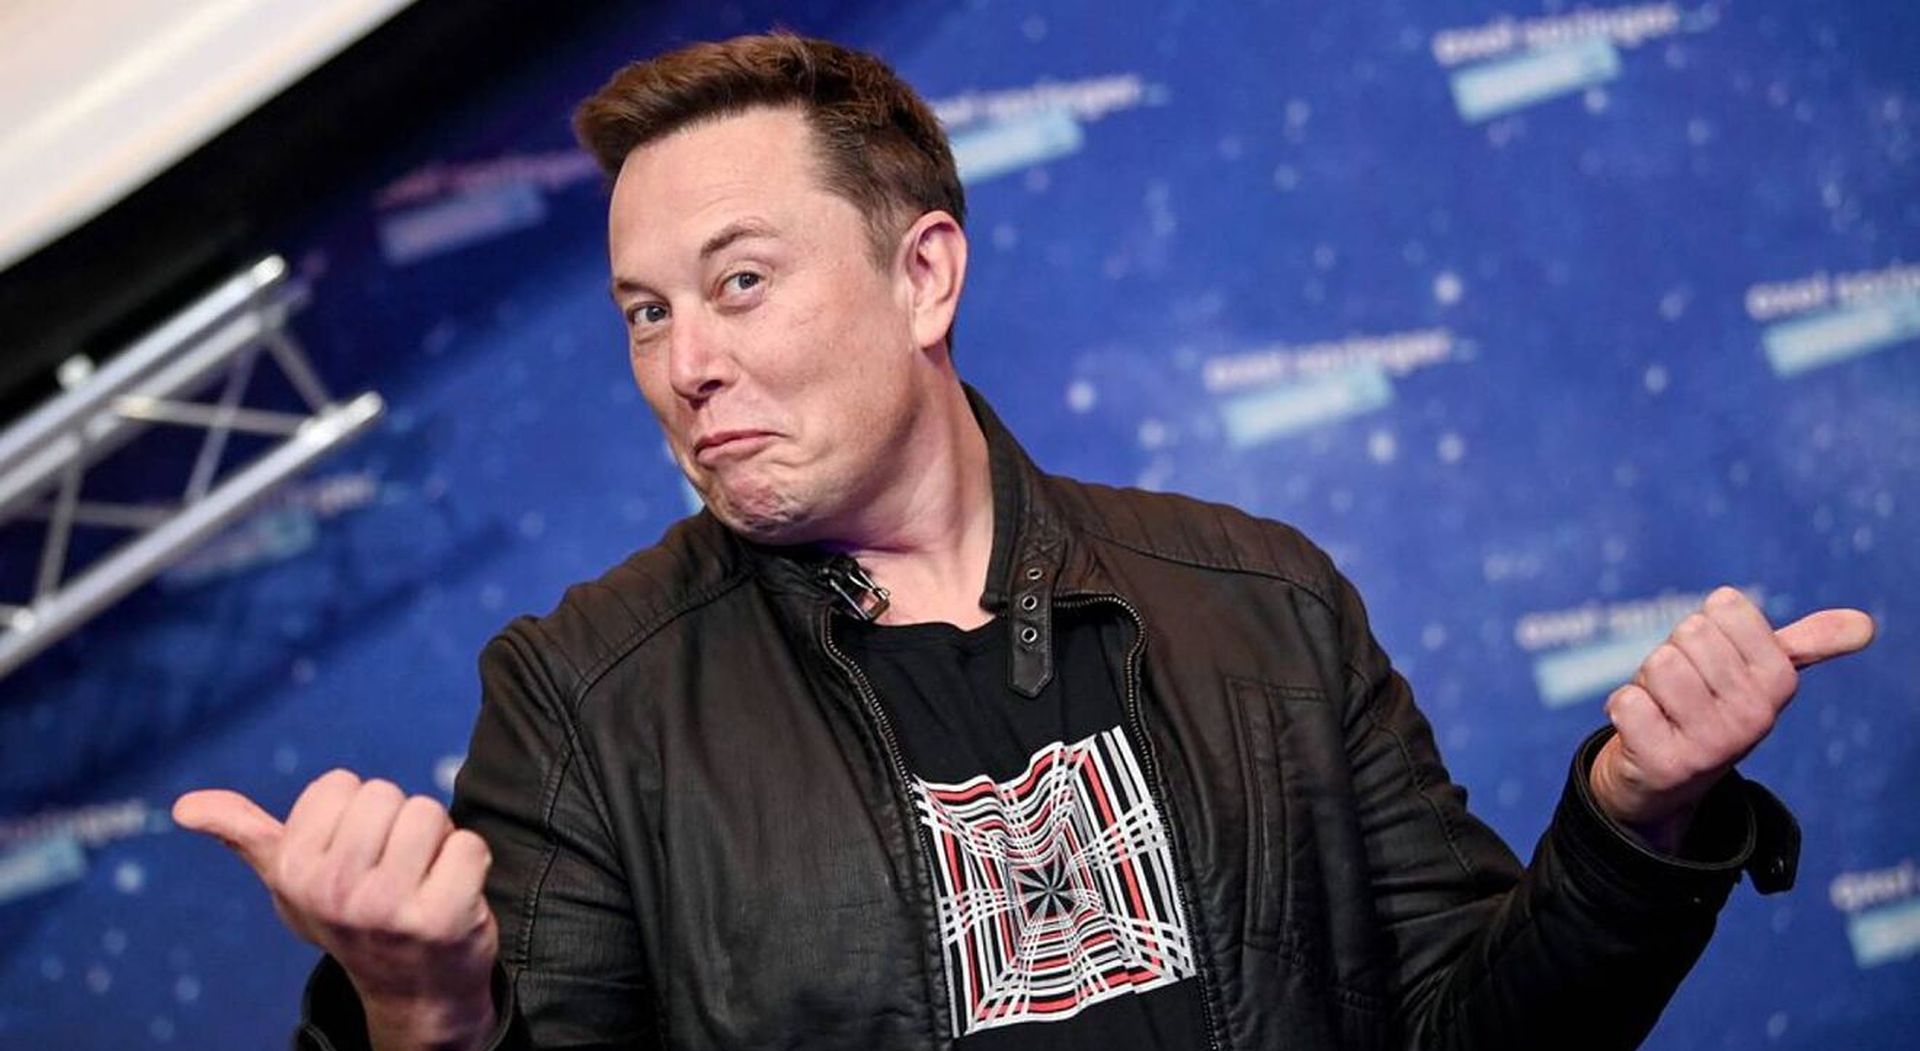 Elon Musk Twitter layoffs might dramatically reduce Twitter's staff after his $44 billion acquisition of the social network is completed. According to the...